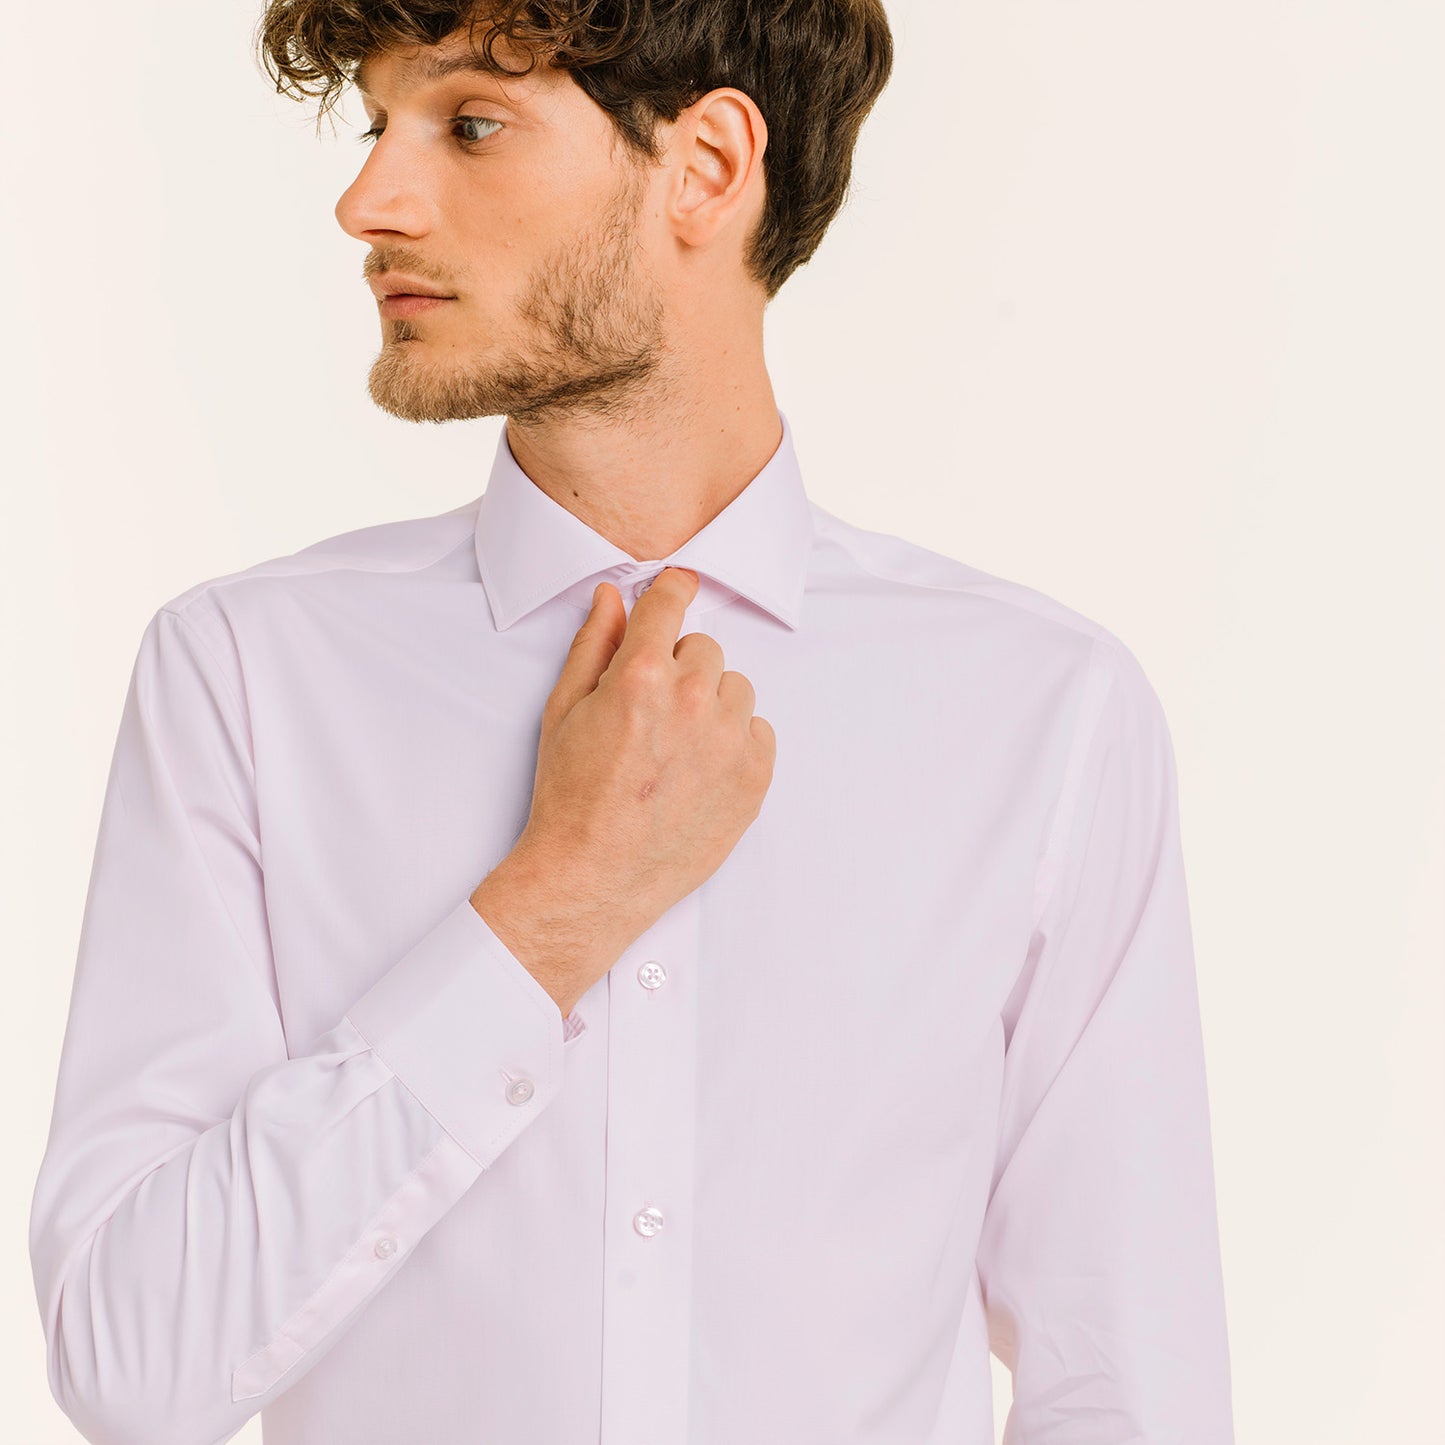 Pale pink double-twisted poplin shirt